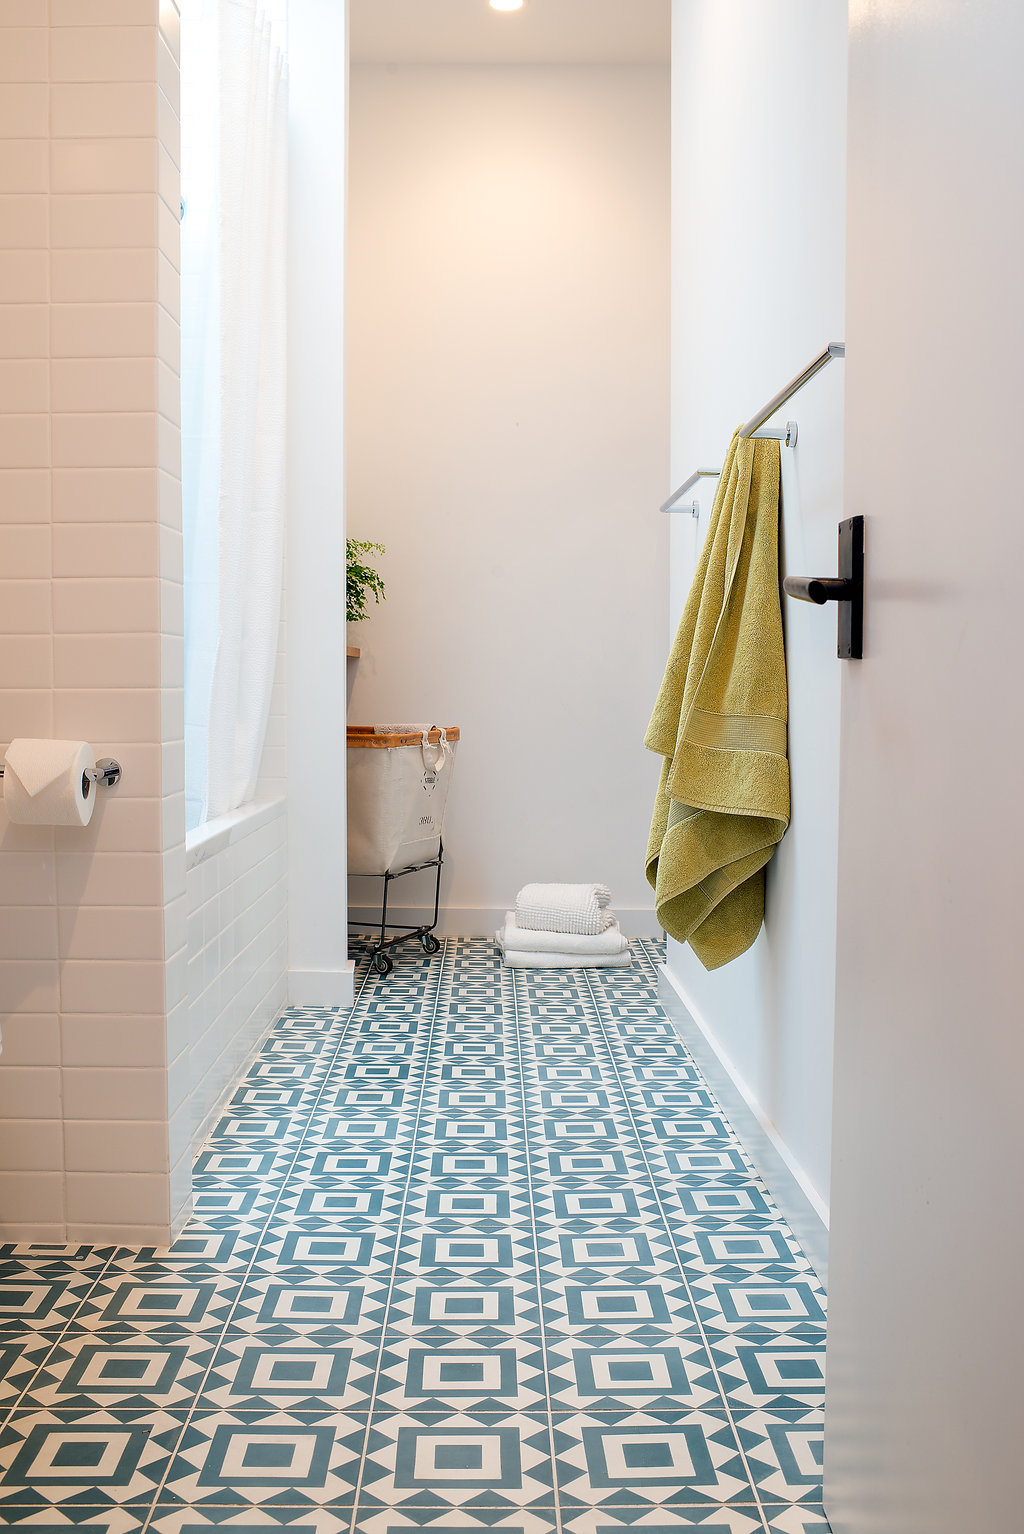 bathroom with white wall tile and blue and white patterned floor tile and chrome hardware.jpg